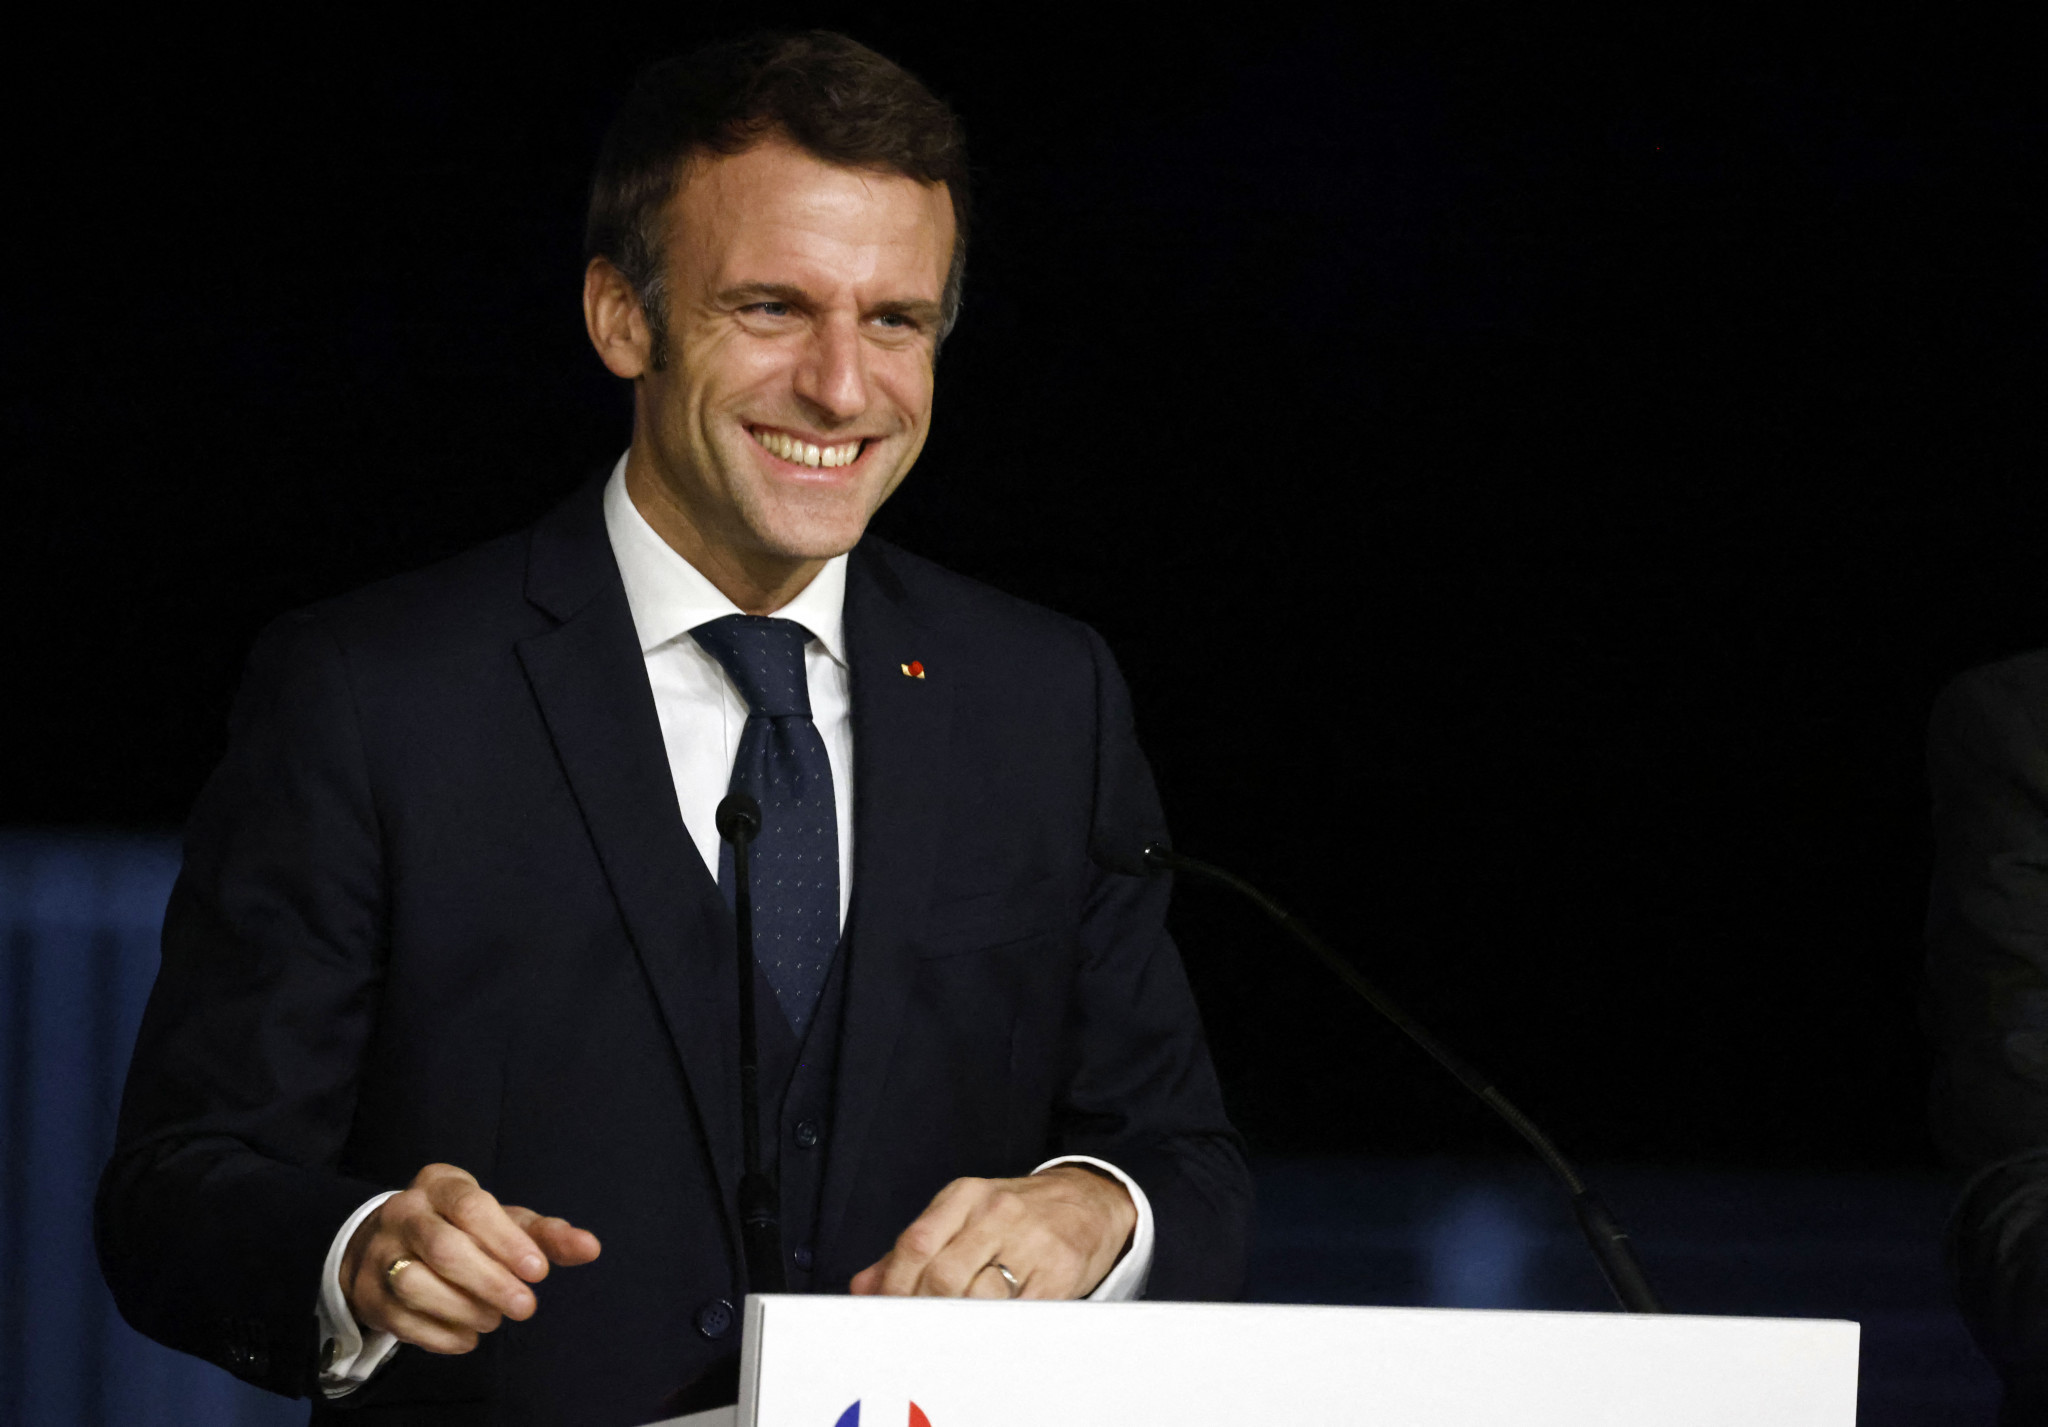 Macron making trip to Qatar to watch France in FIFA World Cup semi-final